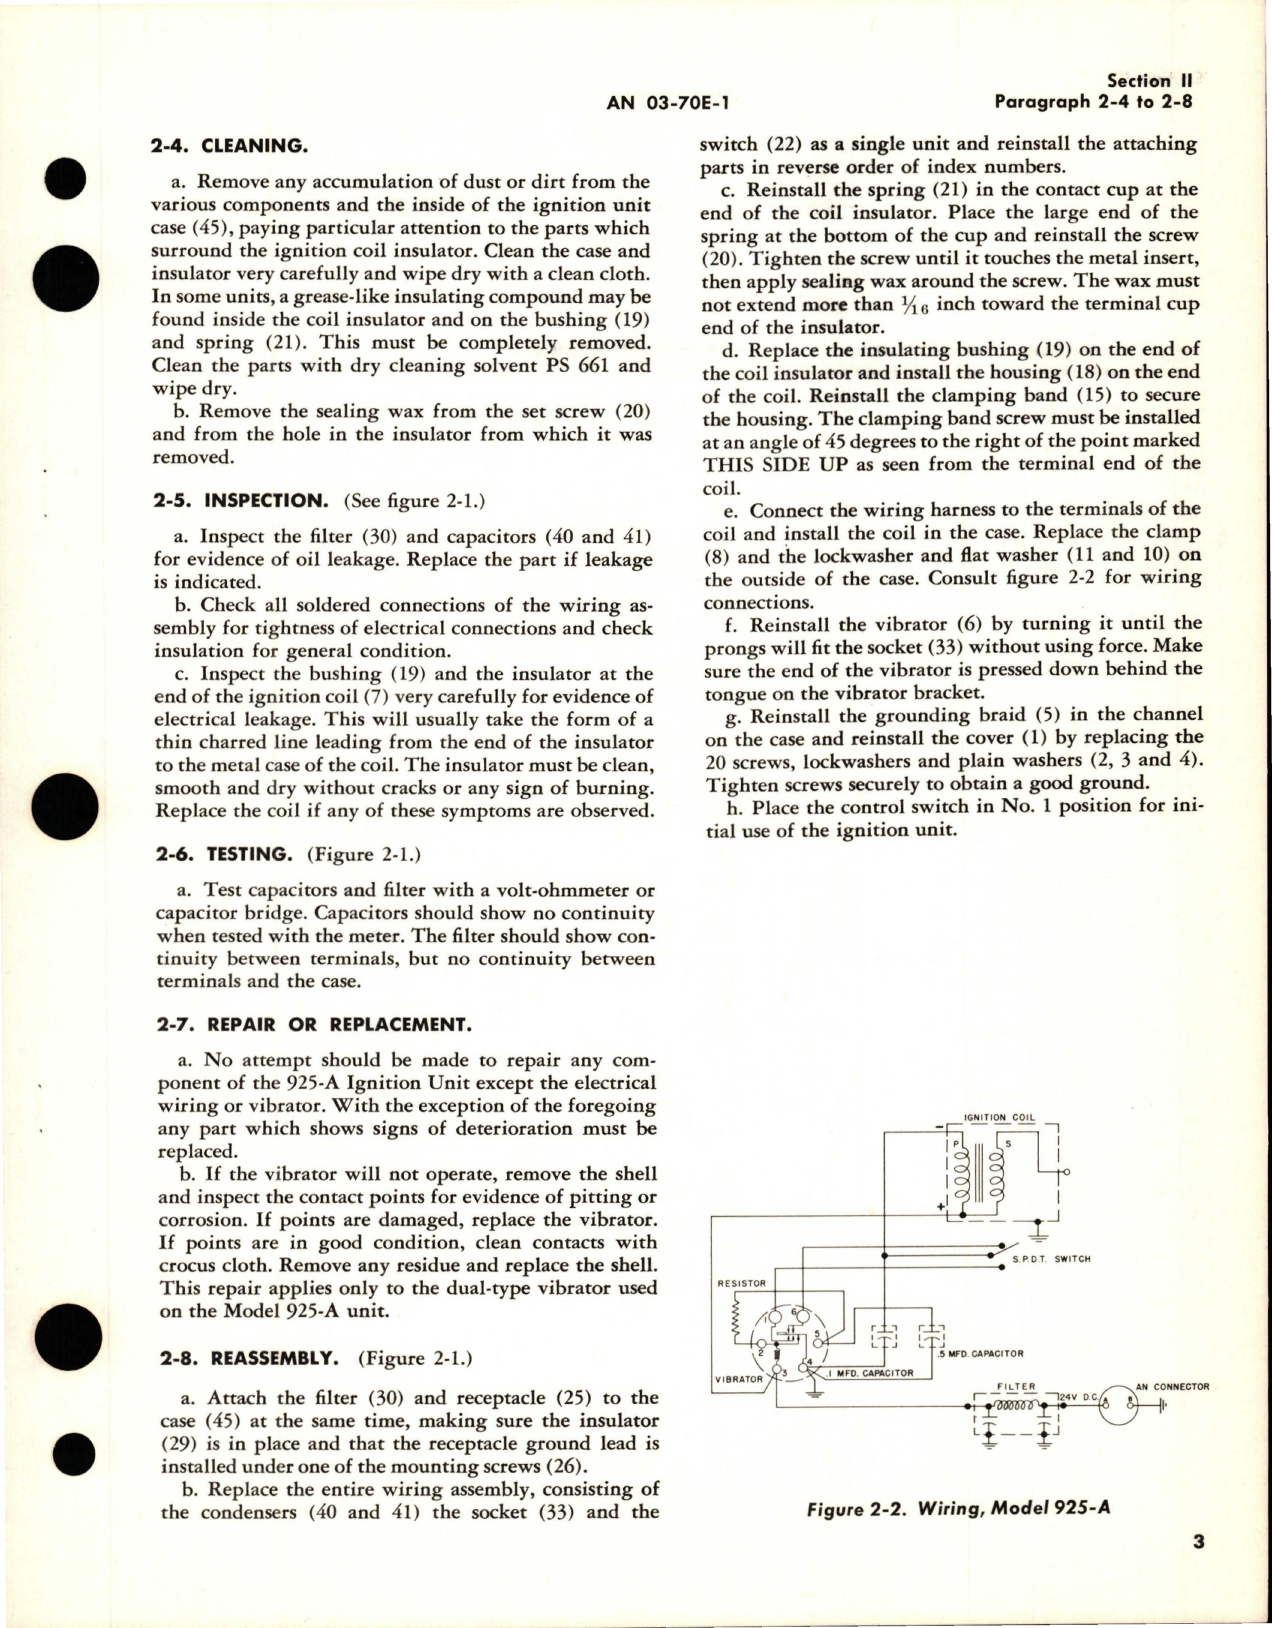 Sample page 7 from AirCorps Library document: Overhaul Instructions for Ignition Units - Model 925 Series